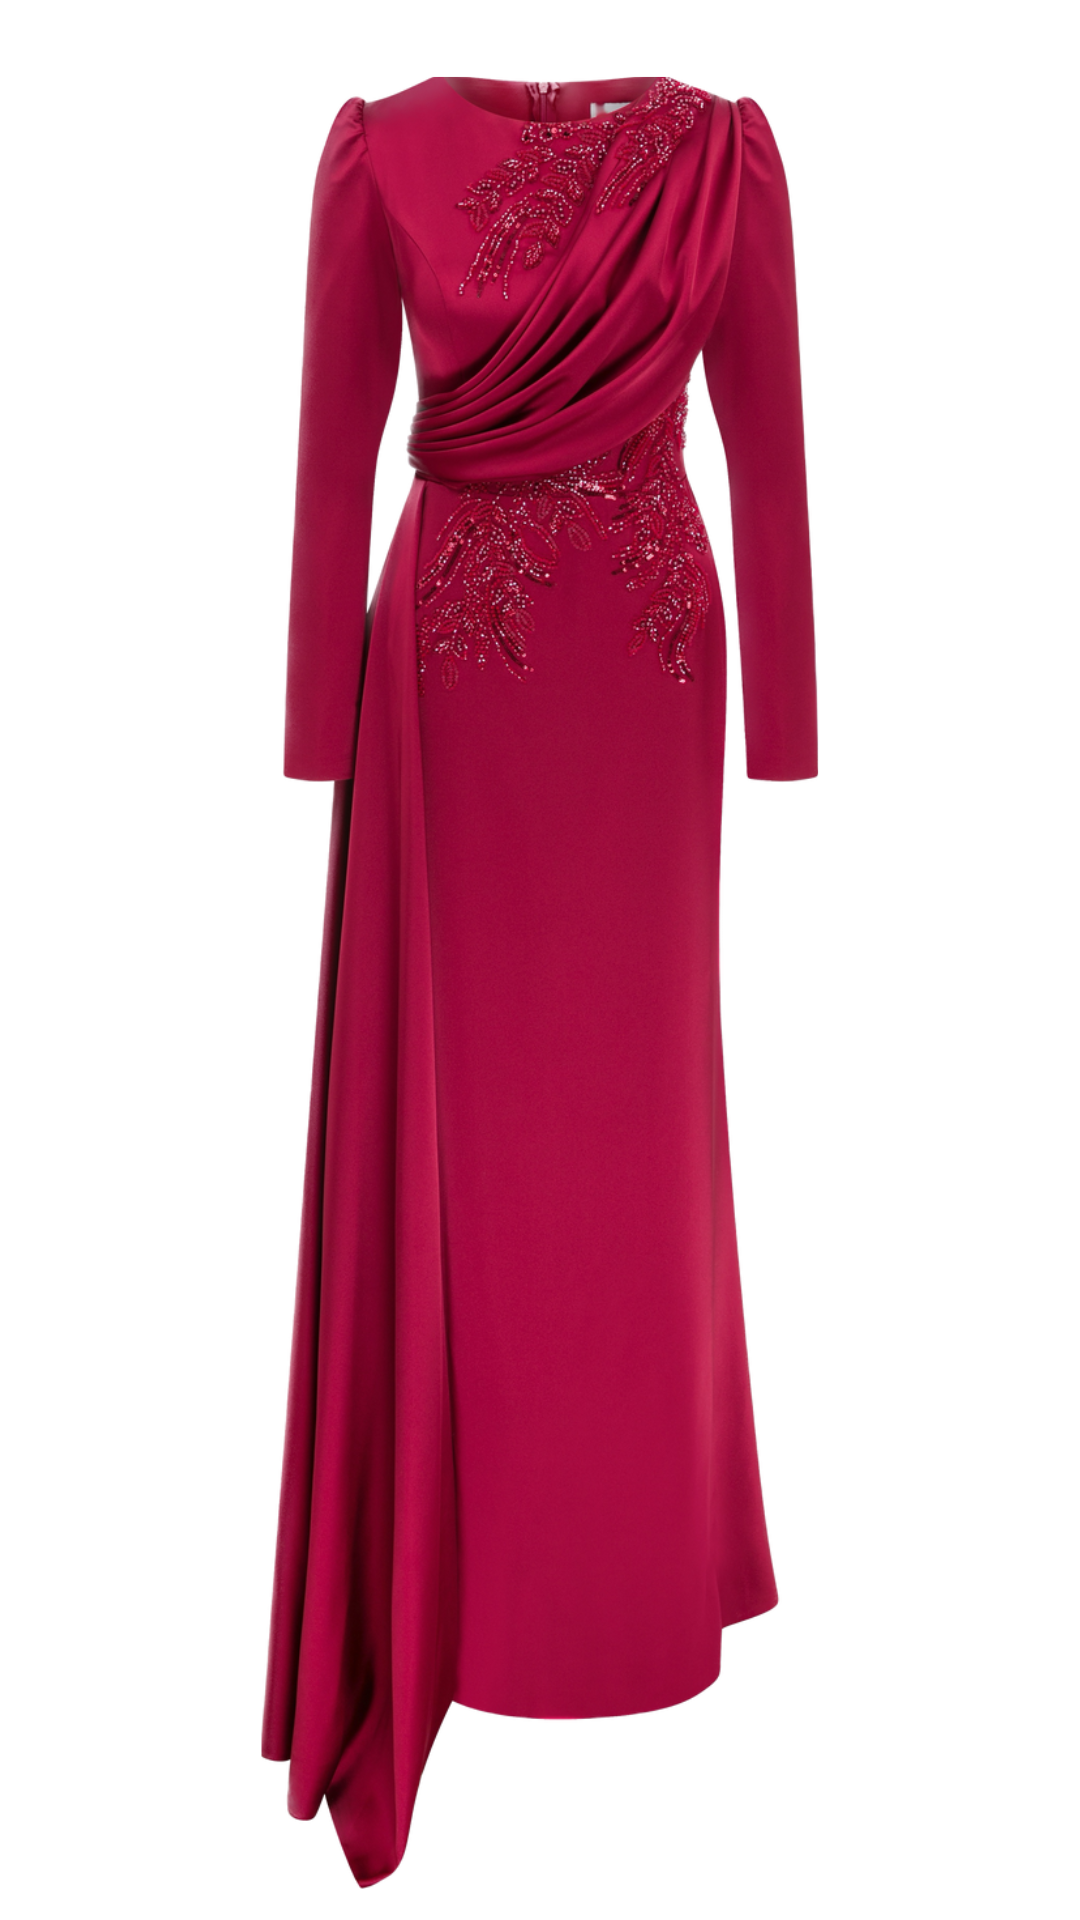 Regal Opulence: Full Mold Satin Dress with Cape Detail